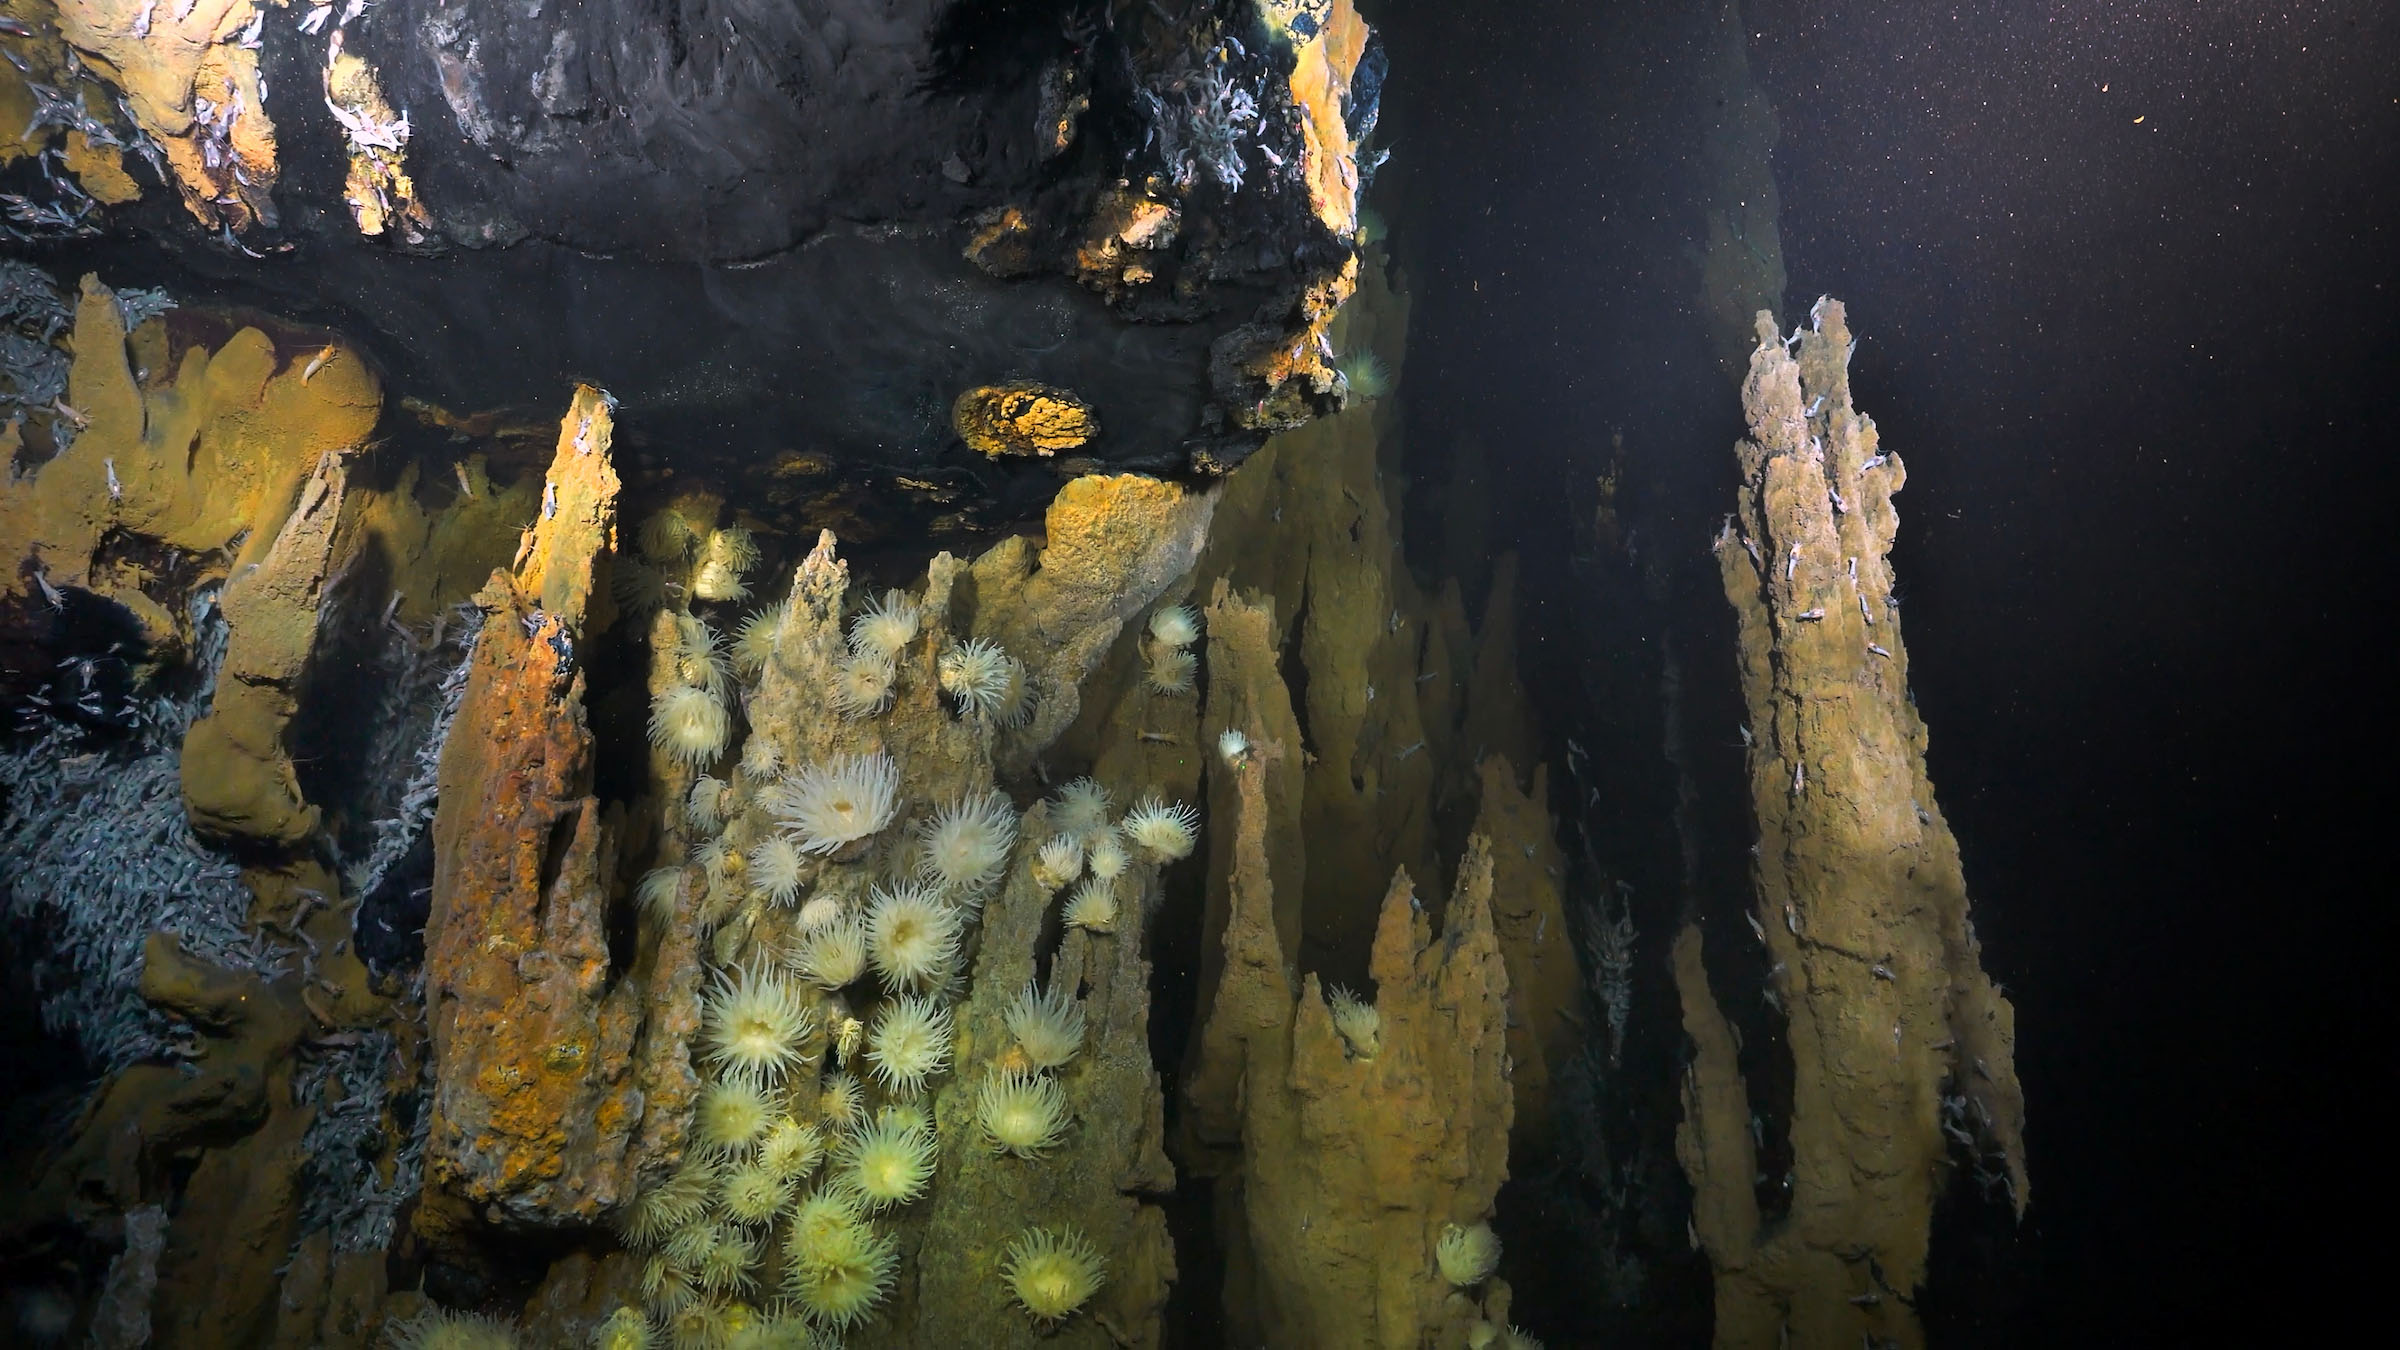 4 Within hydrothermal vents 